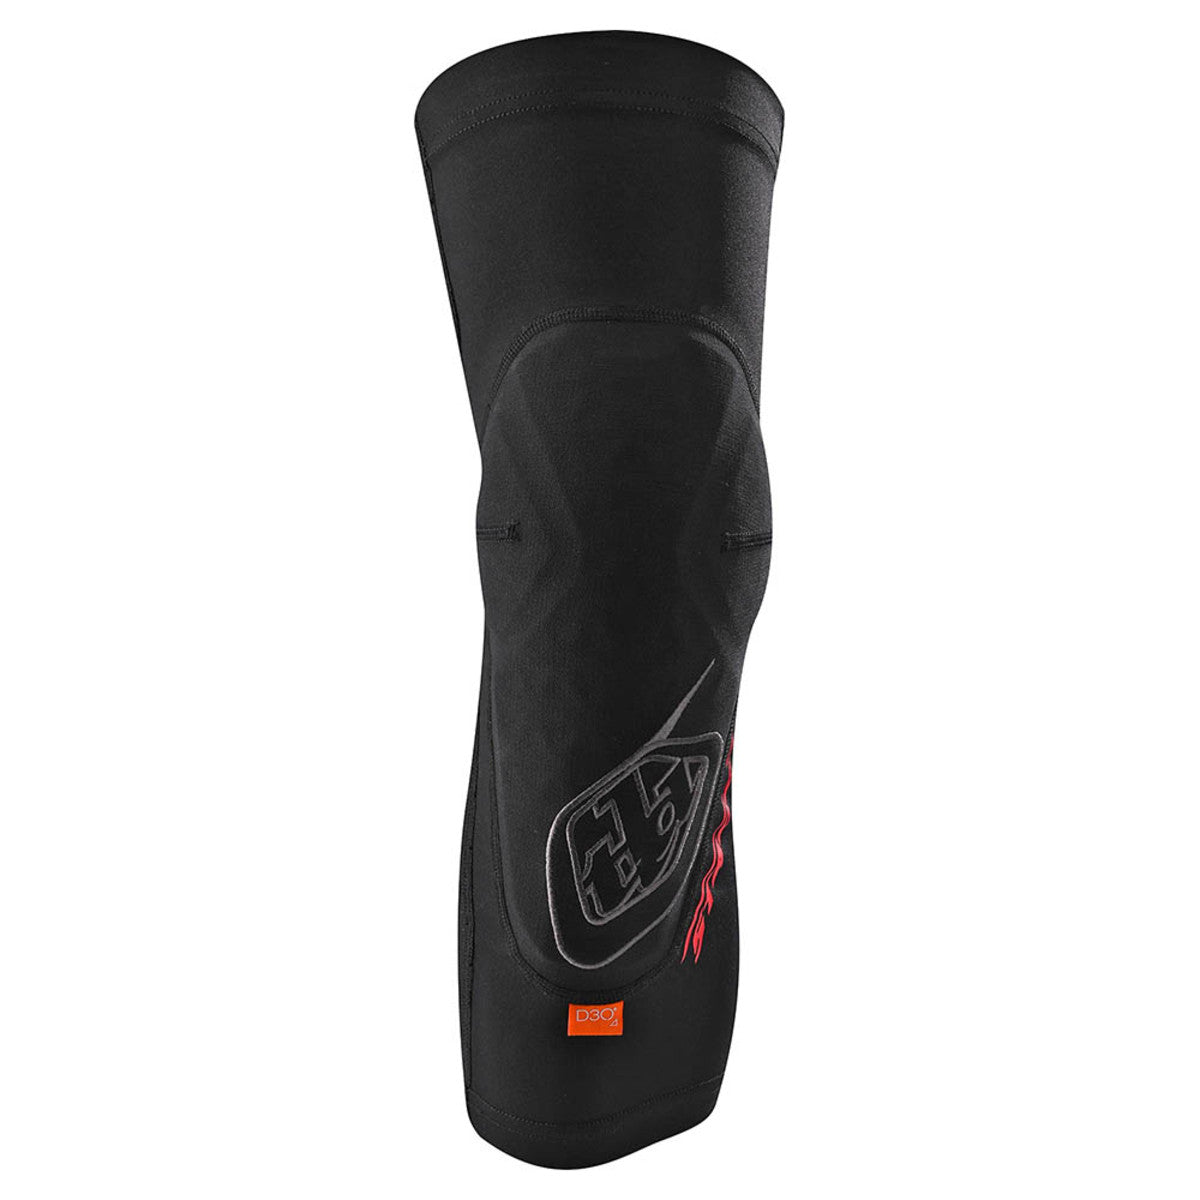 TLD STAGE KNEE GUARDS